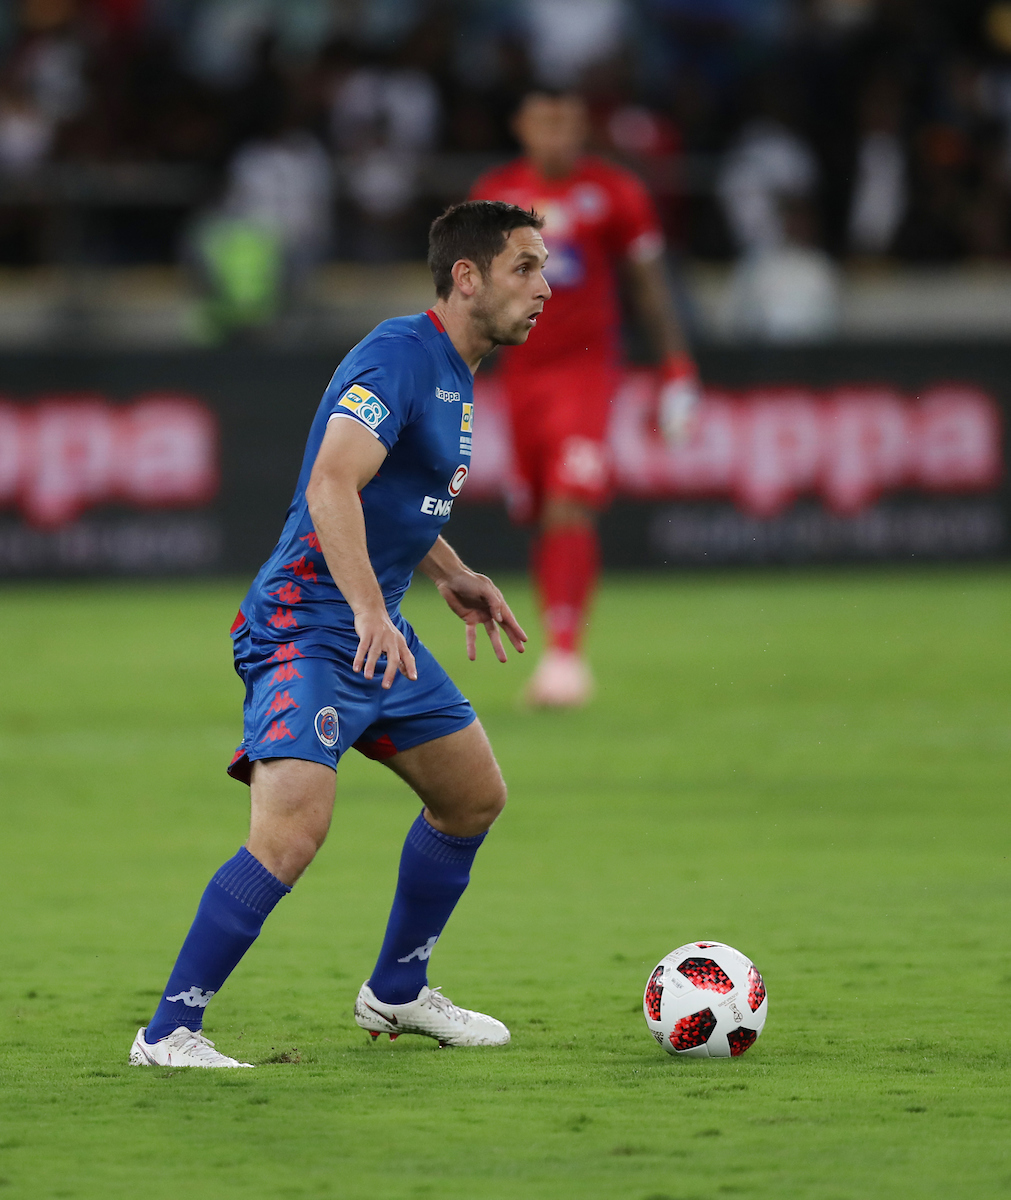 ean Furman (C) of SuperSport United during the 2018 MTN8 final match between SuperSport United and Cape Town City at the Moses Mabhida Stadium on 29th September 2018 in Durban, South Africa. (Photo by Steve Haag/)